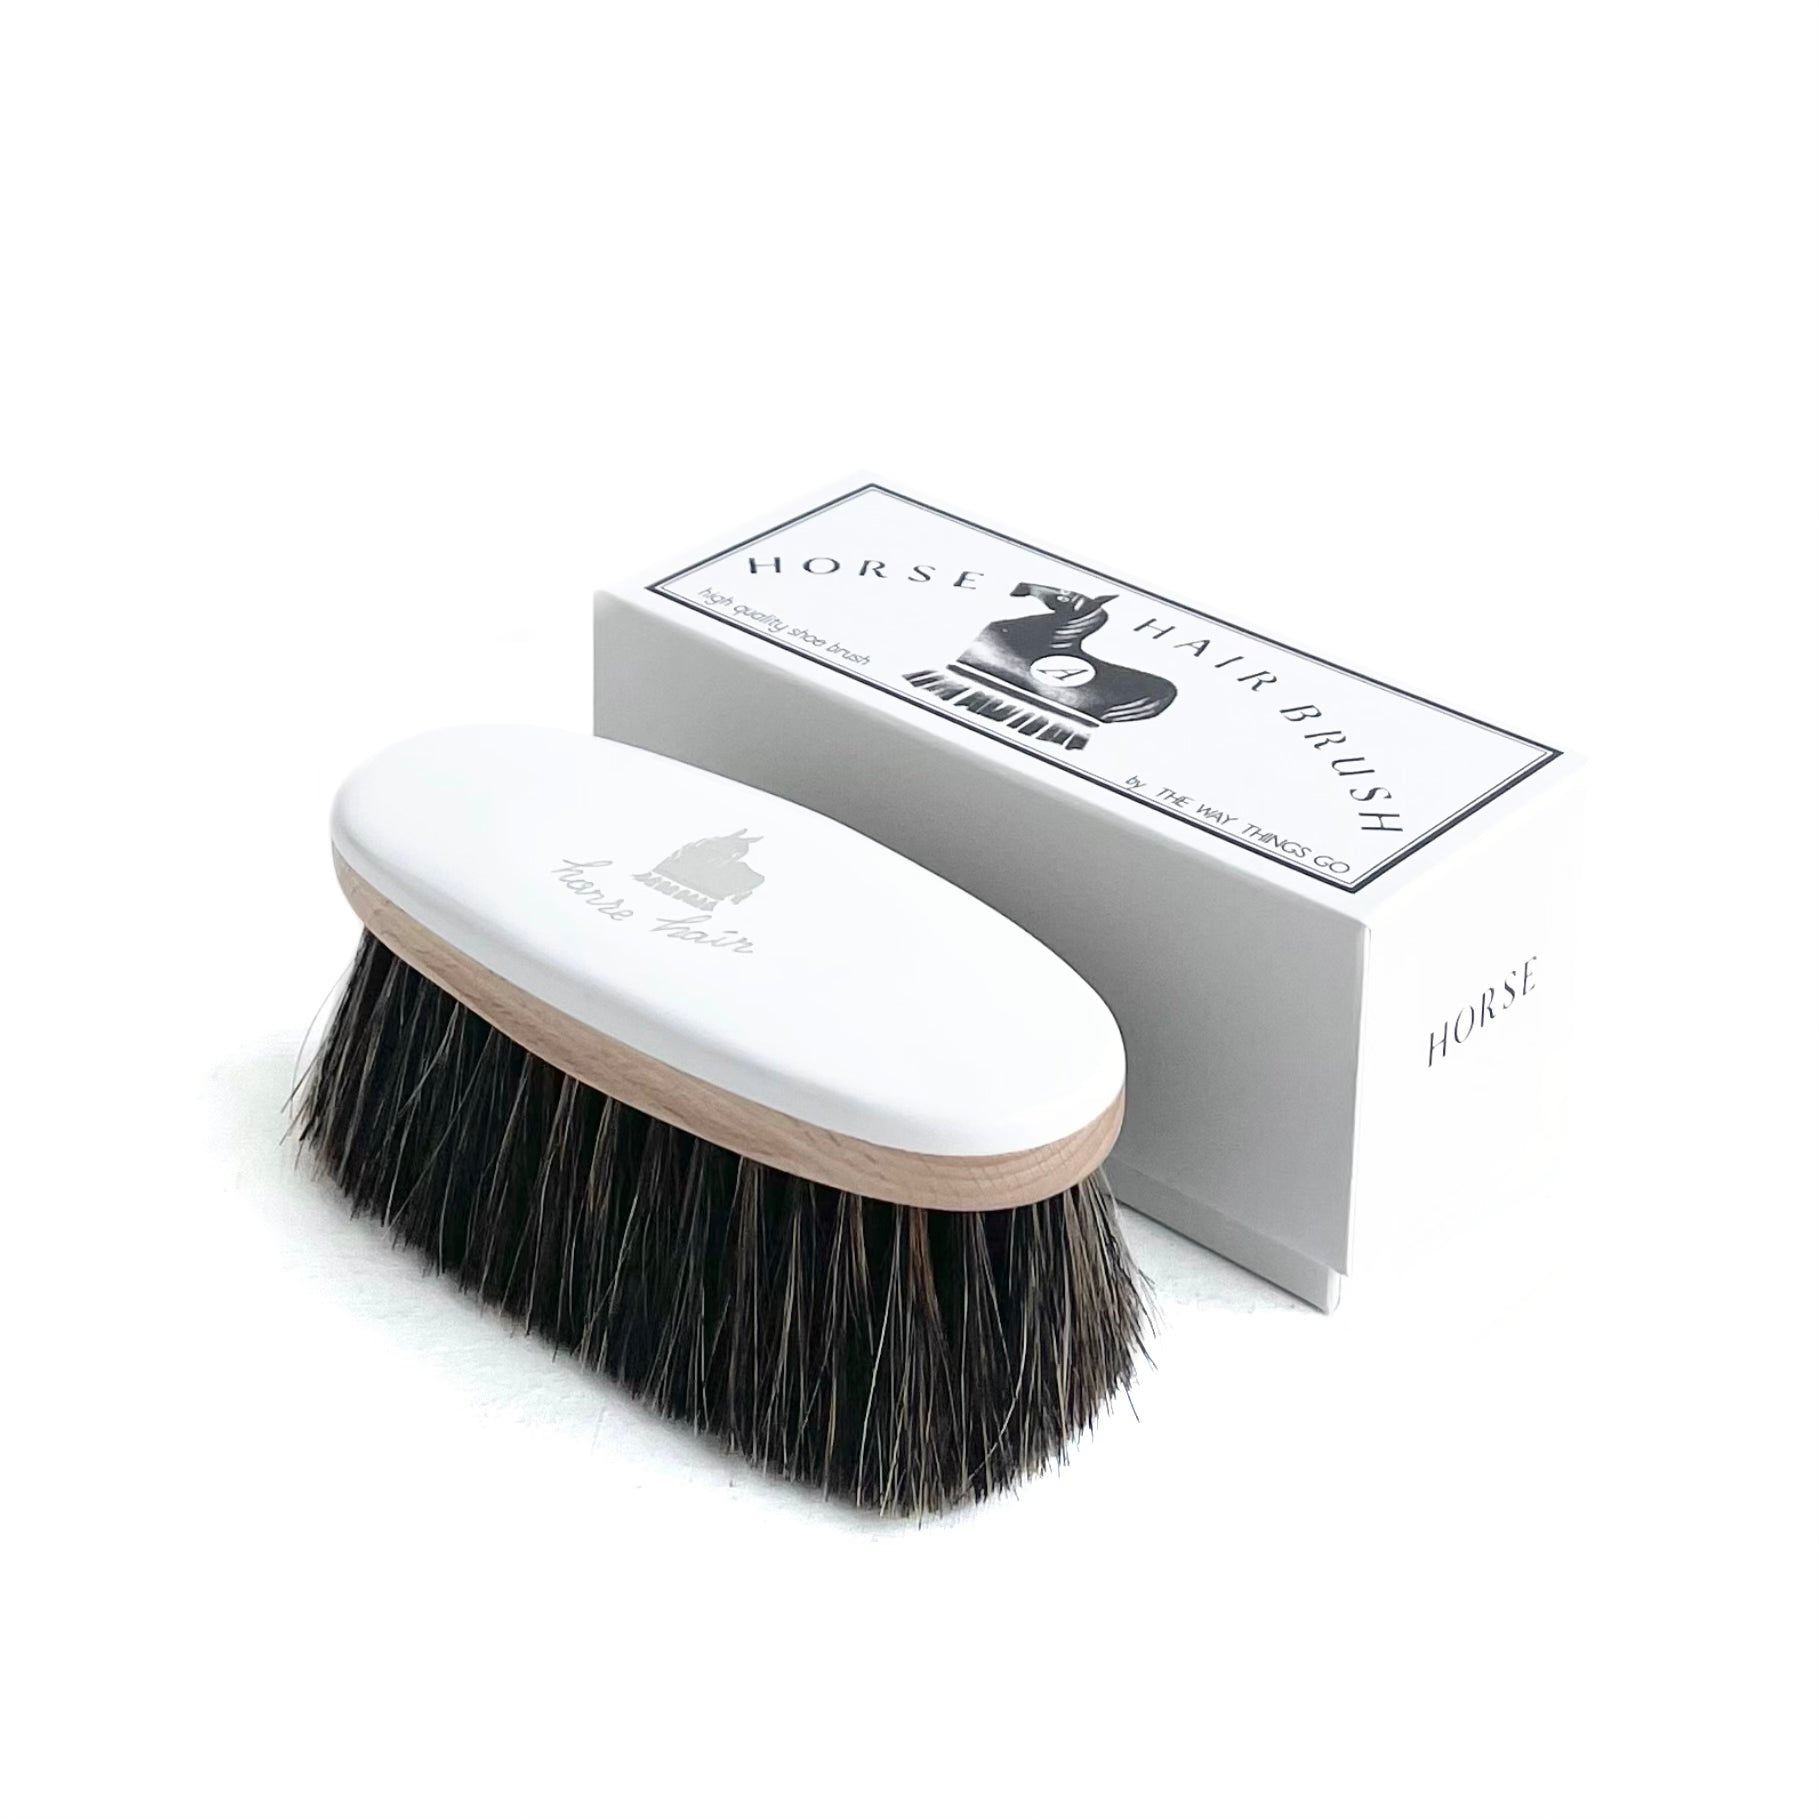 ANATOMICA KOBE SHOES BRUSH by THE WAY THINGS GO